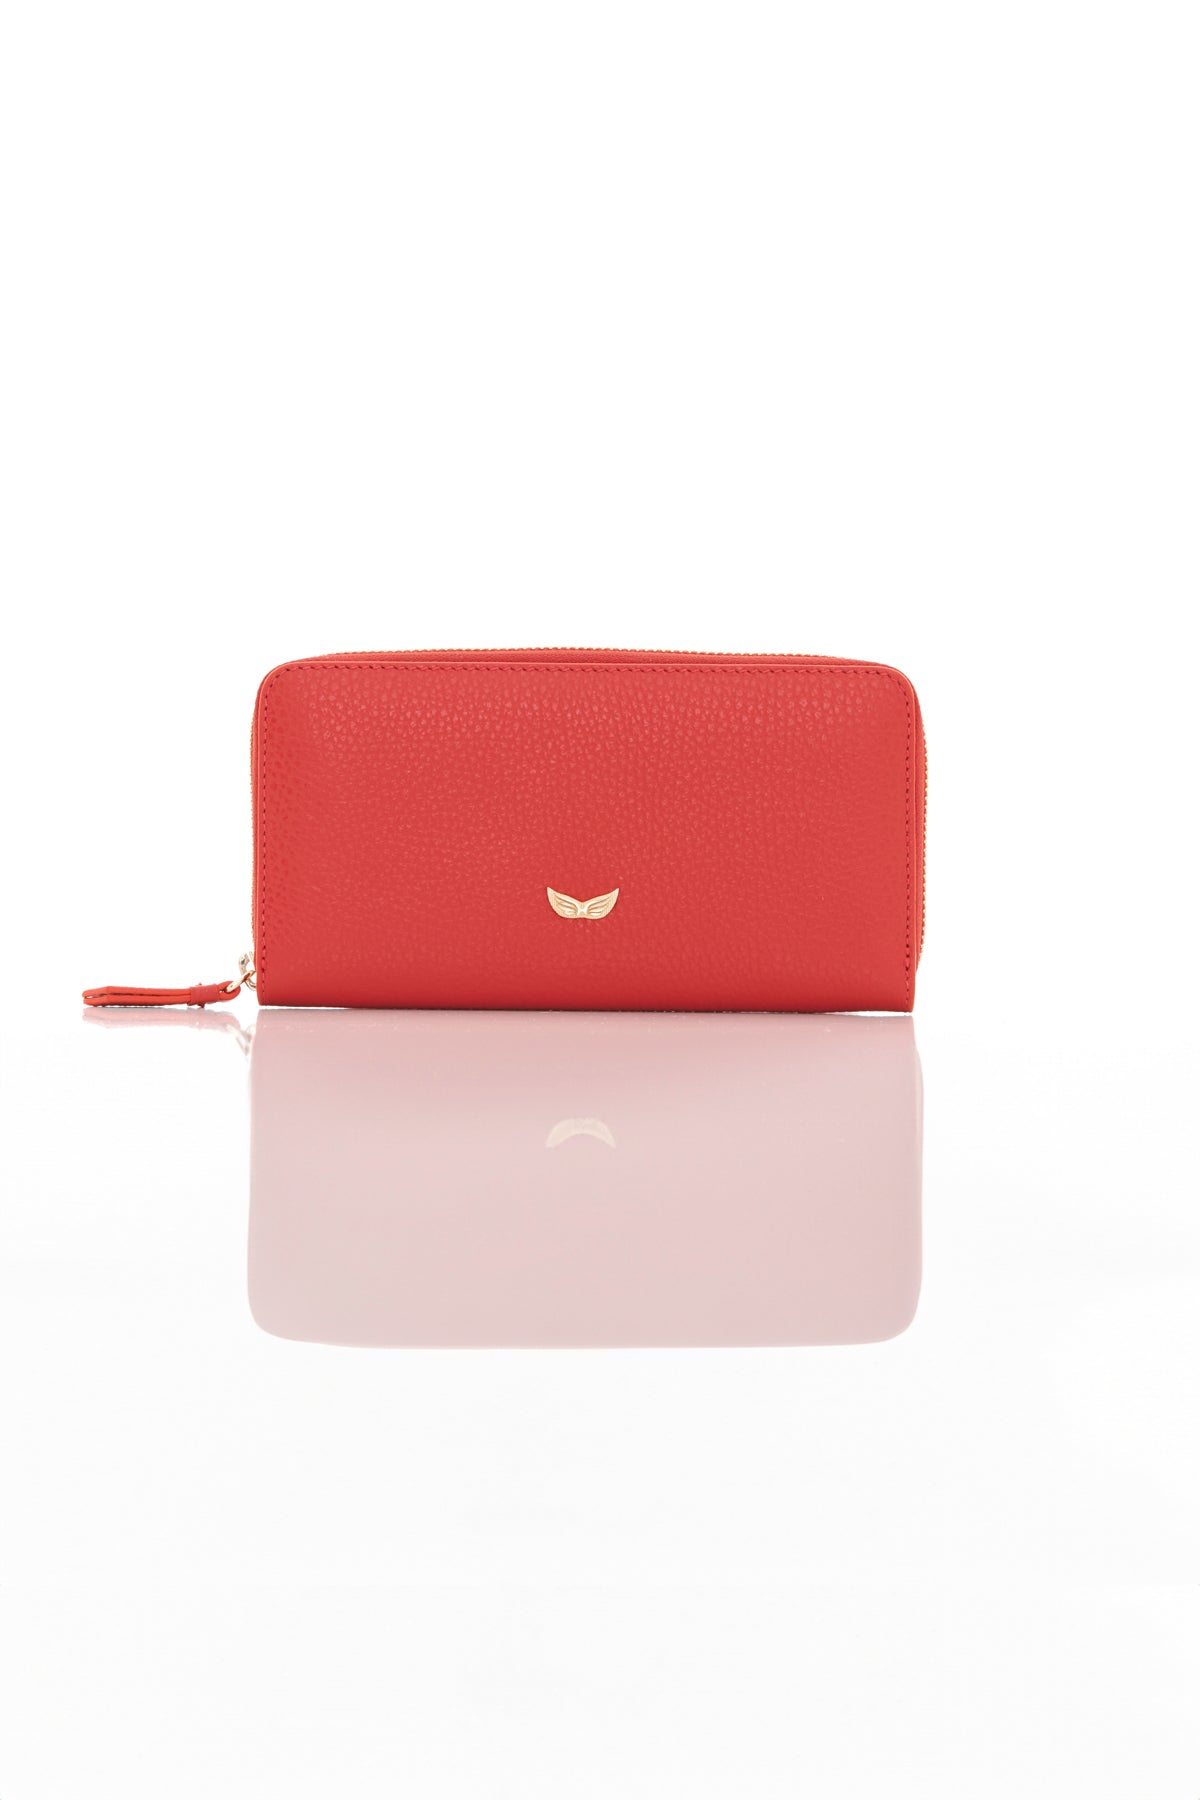 red michael genuine leather women's wallet back